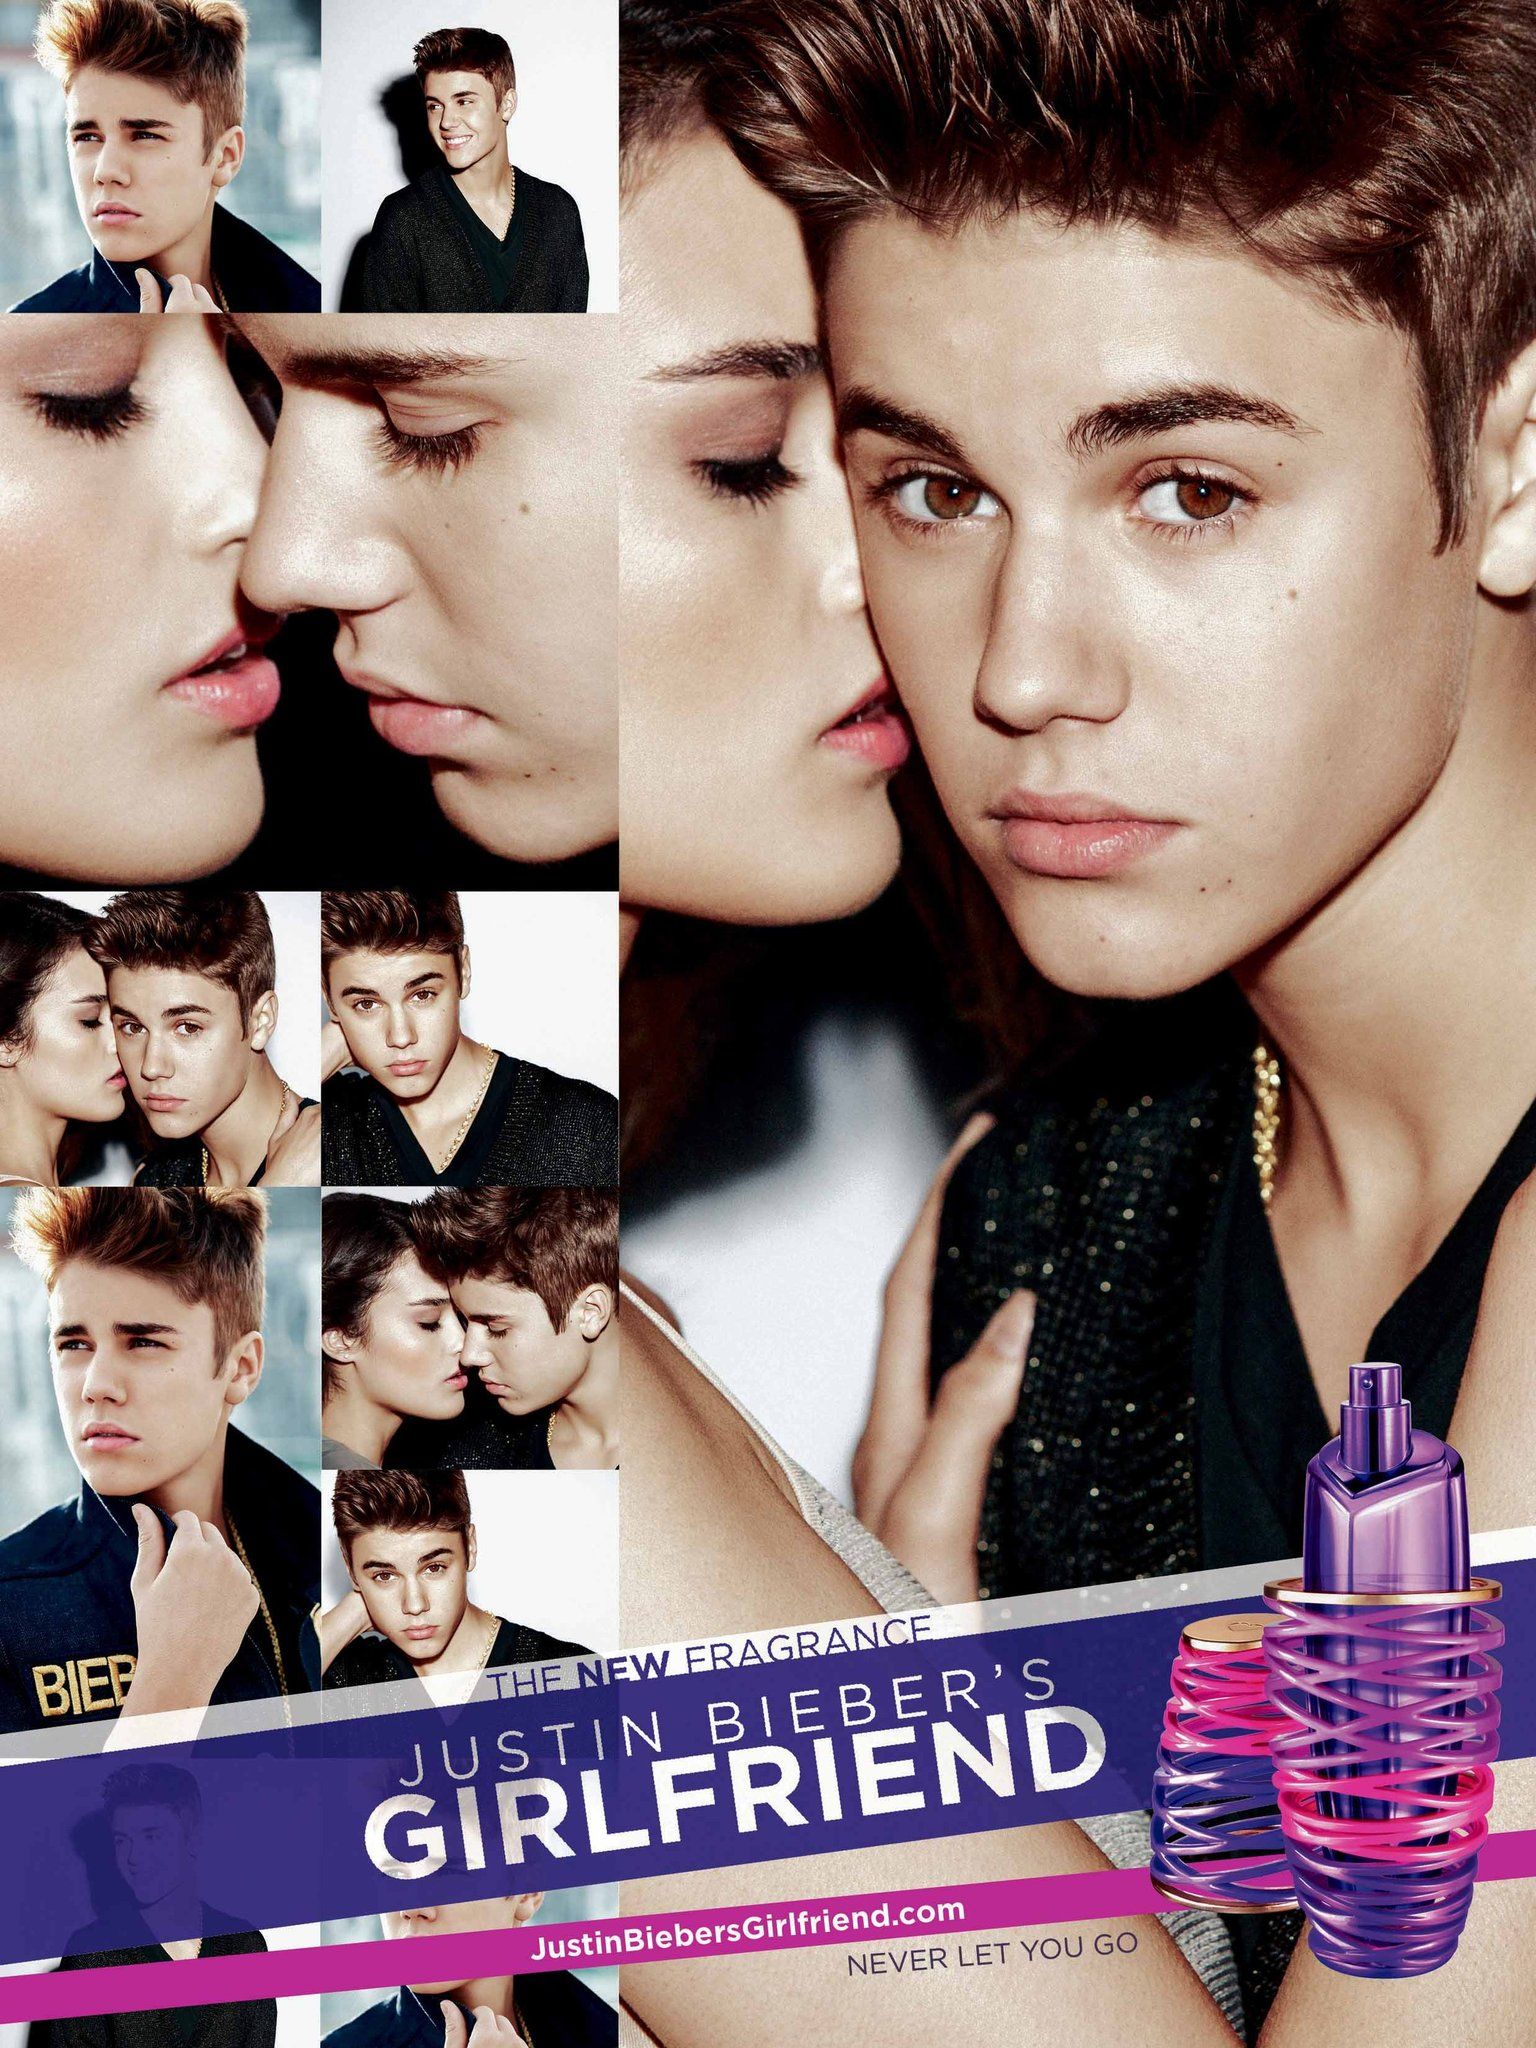 To Introduce Justin Bieber's Girlfriend Fragrance, a Social Media